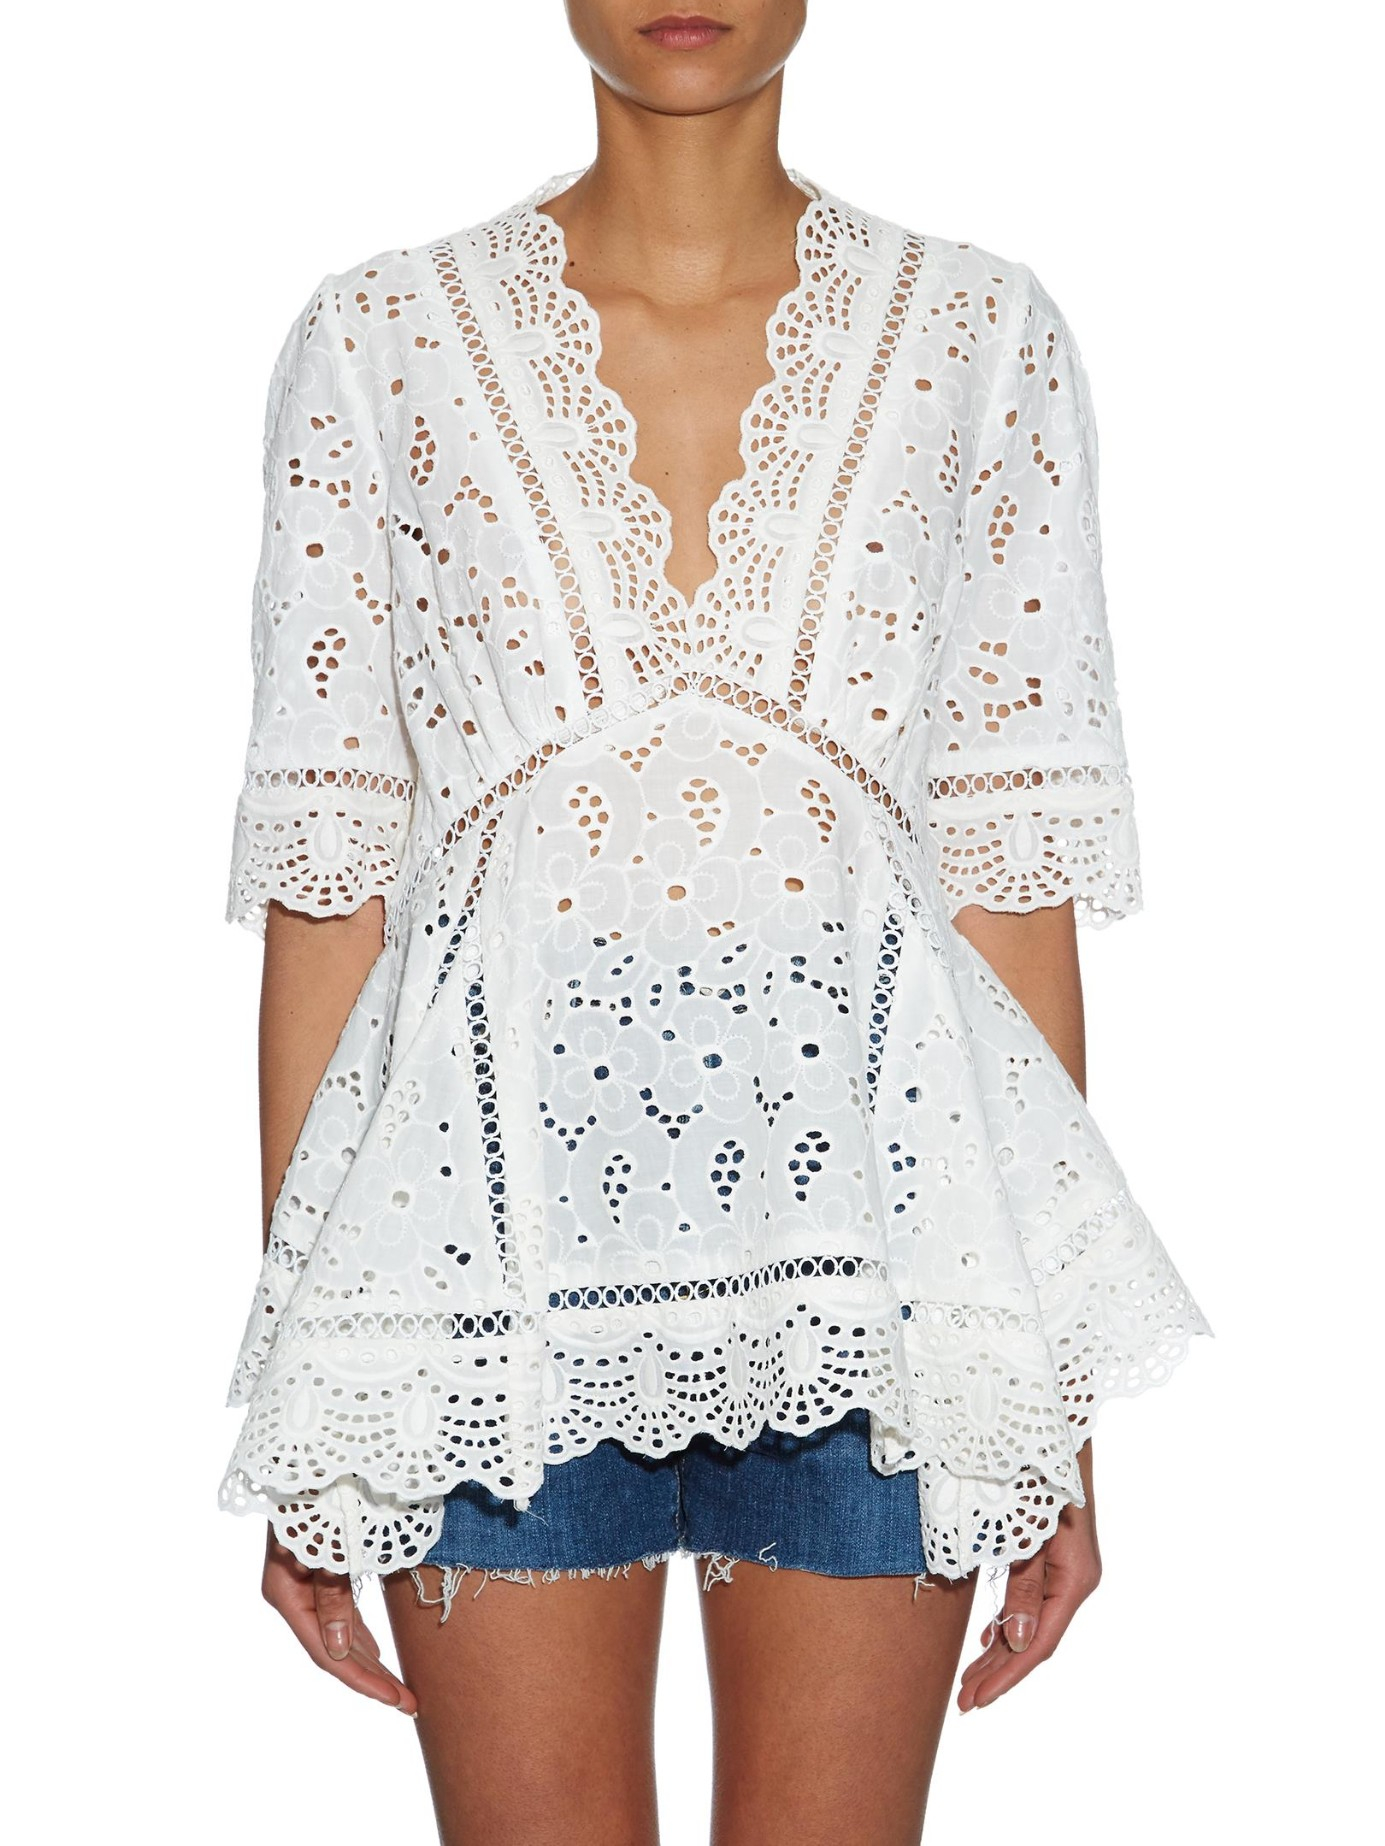 Zimmermann Hyper Eyelet Broderie Anglaise Top In Ivory White Lyst